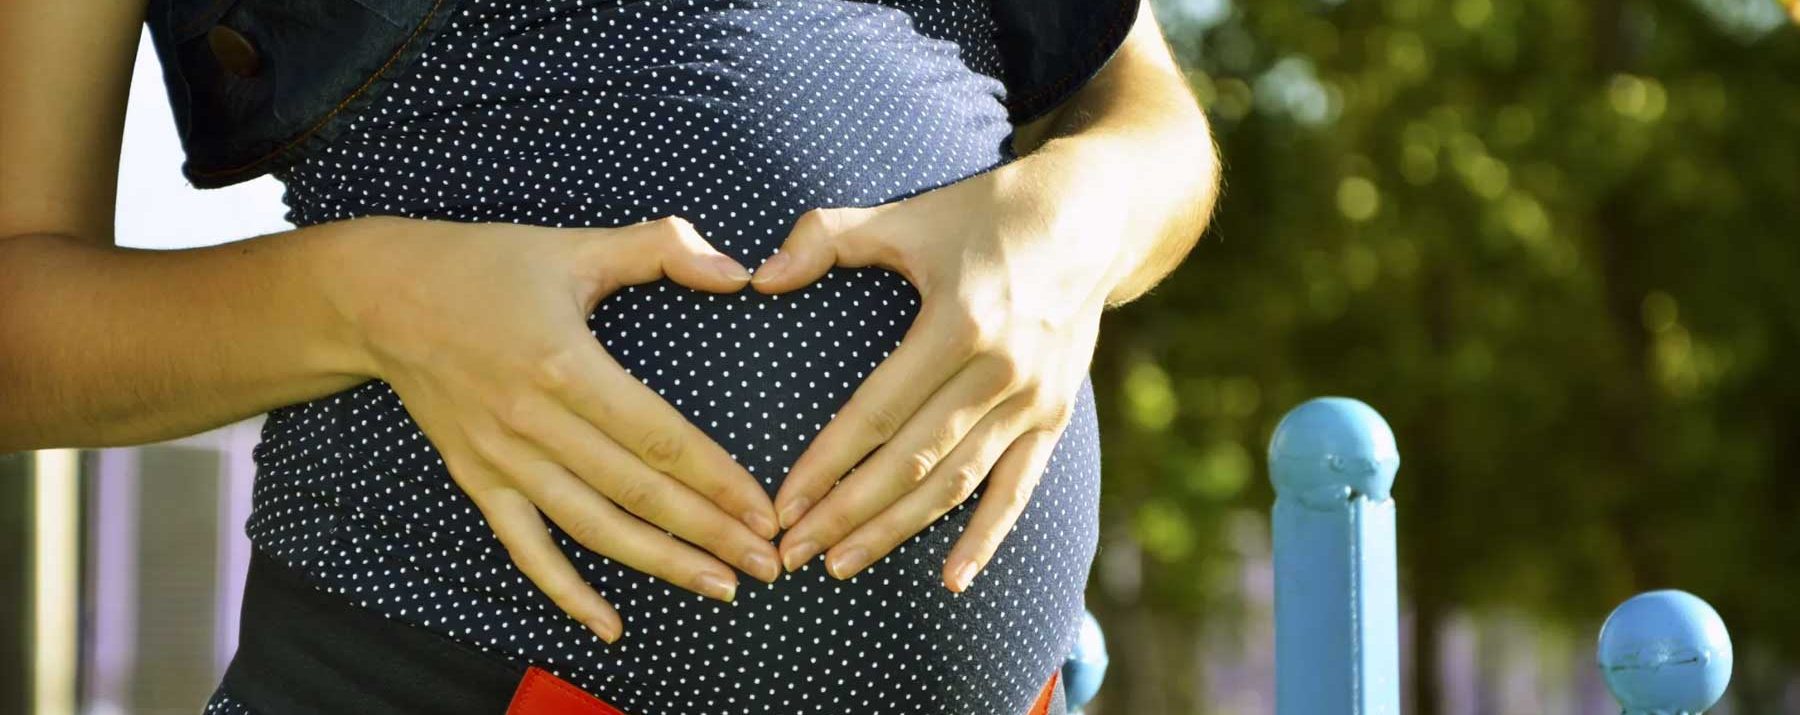 Webster certified
to help pregnant women